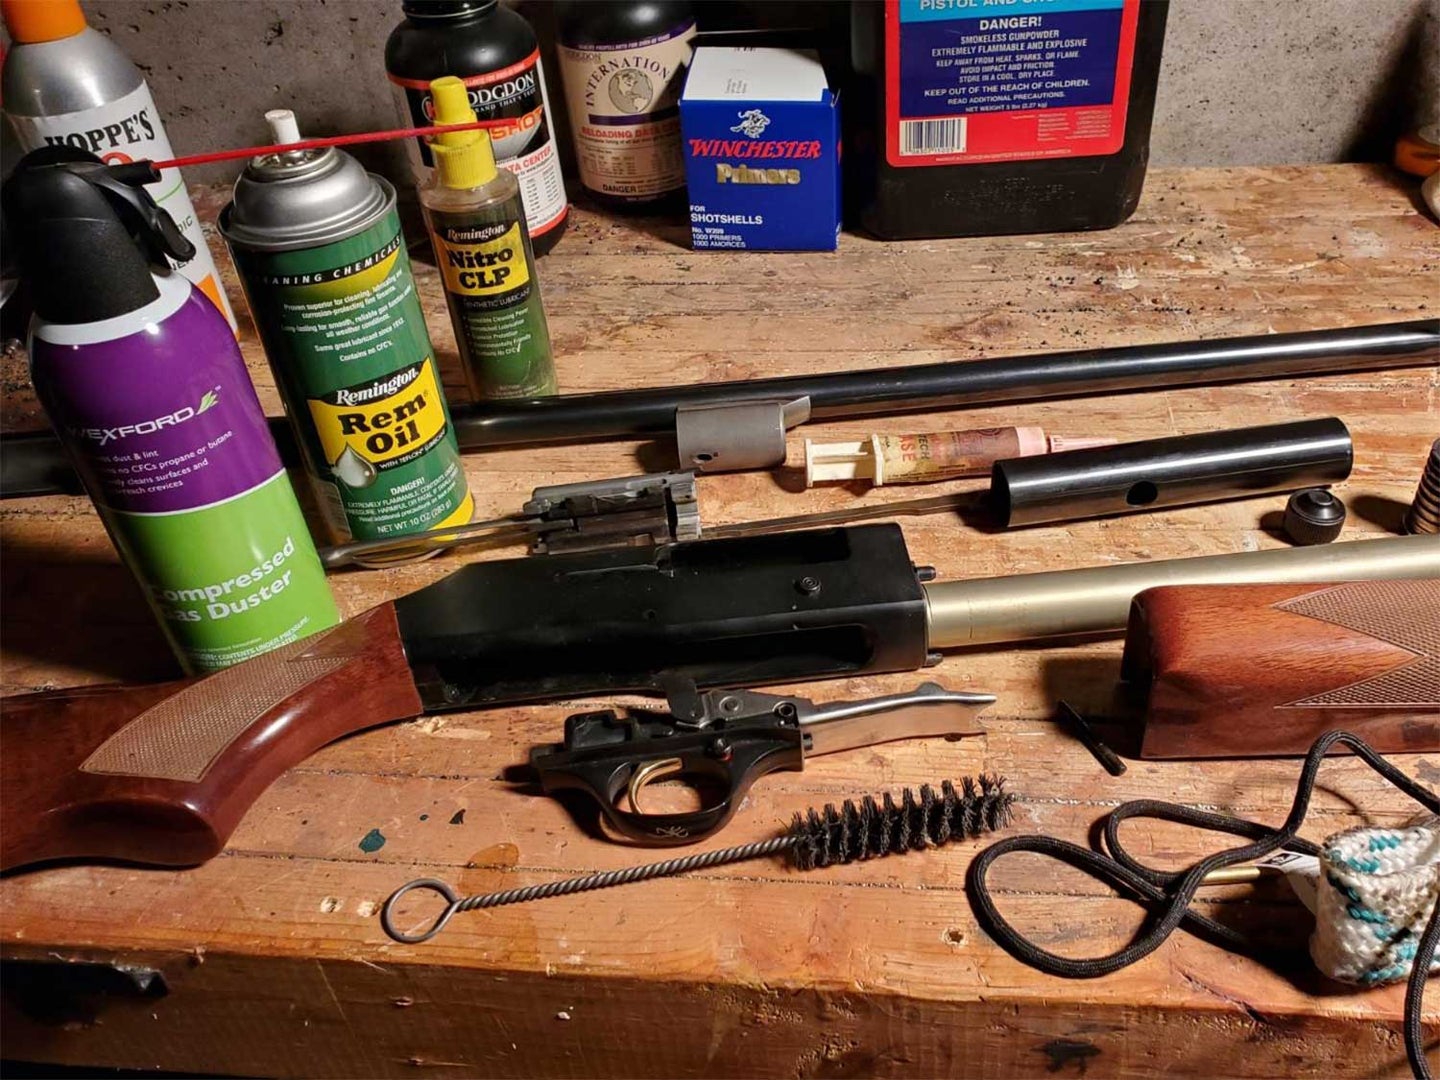 A disaassembled shotgun on a table next to cleaning supplies and tools.